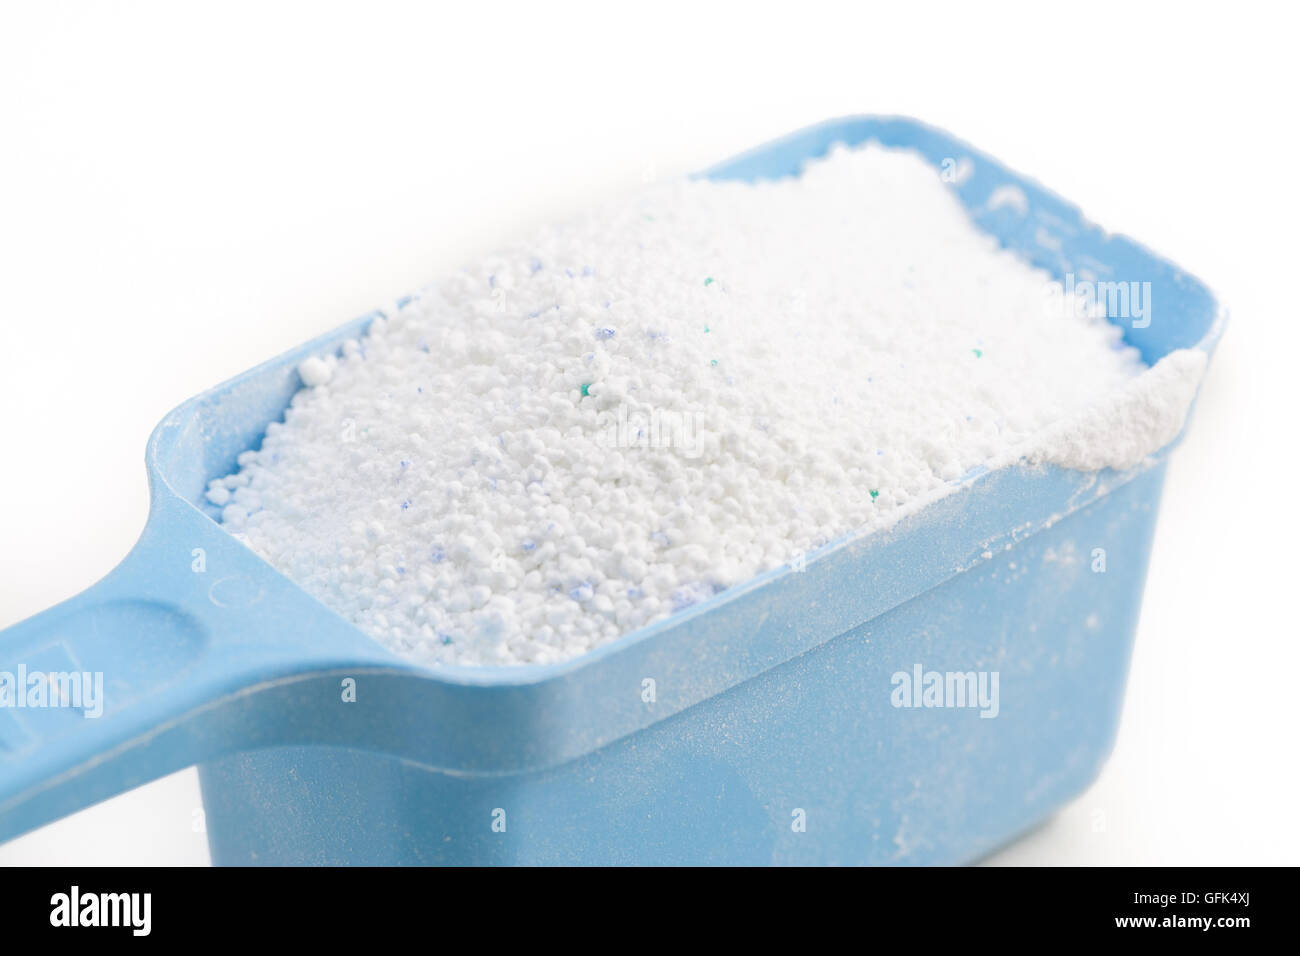 Laundry Detergent Or Washing Powder In A Blue Measuring Cup On A Kitchen  Counter Top Stock Photo, Picture and Royalty Free Image. Image 22949907.